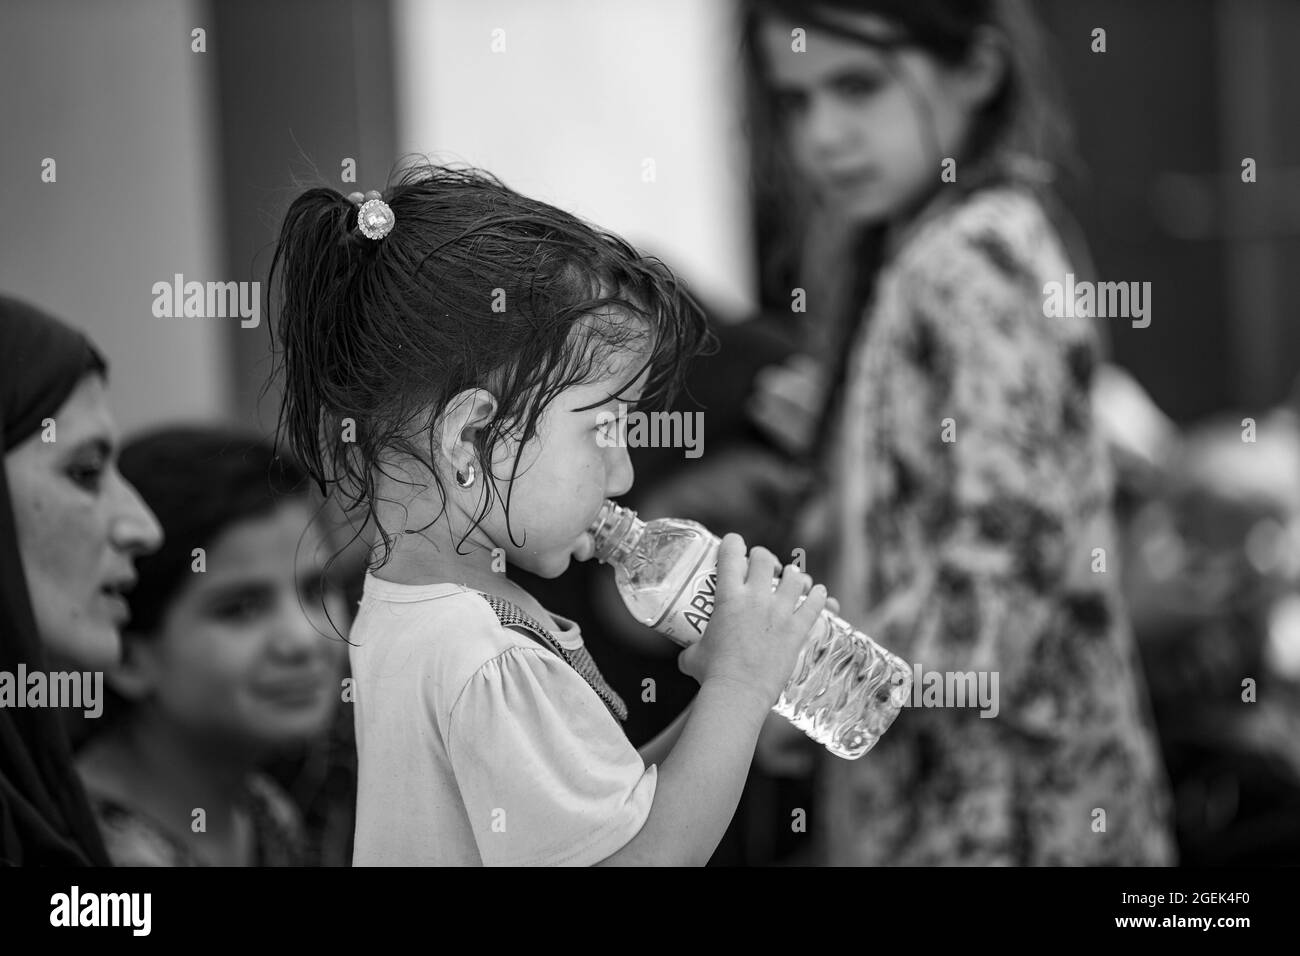 A child sips fresh water during an evacuation at Hamid Karzai International Airport, Kabul, Afghanistan, Aug. 20. U.S. service members are assisting the Department of State with an orderly drawdown of designated personnel in Afghanistan. (U.S. Marine Corps photo by Sgt. Samuel Ruiz). Stock Photo